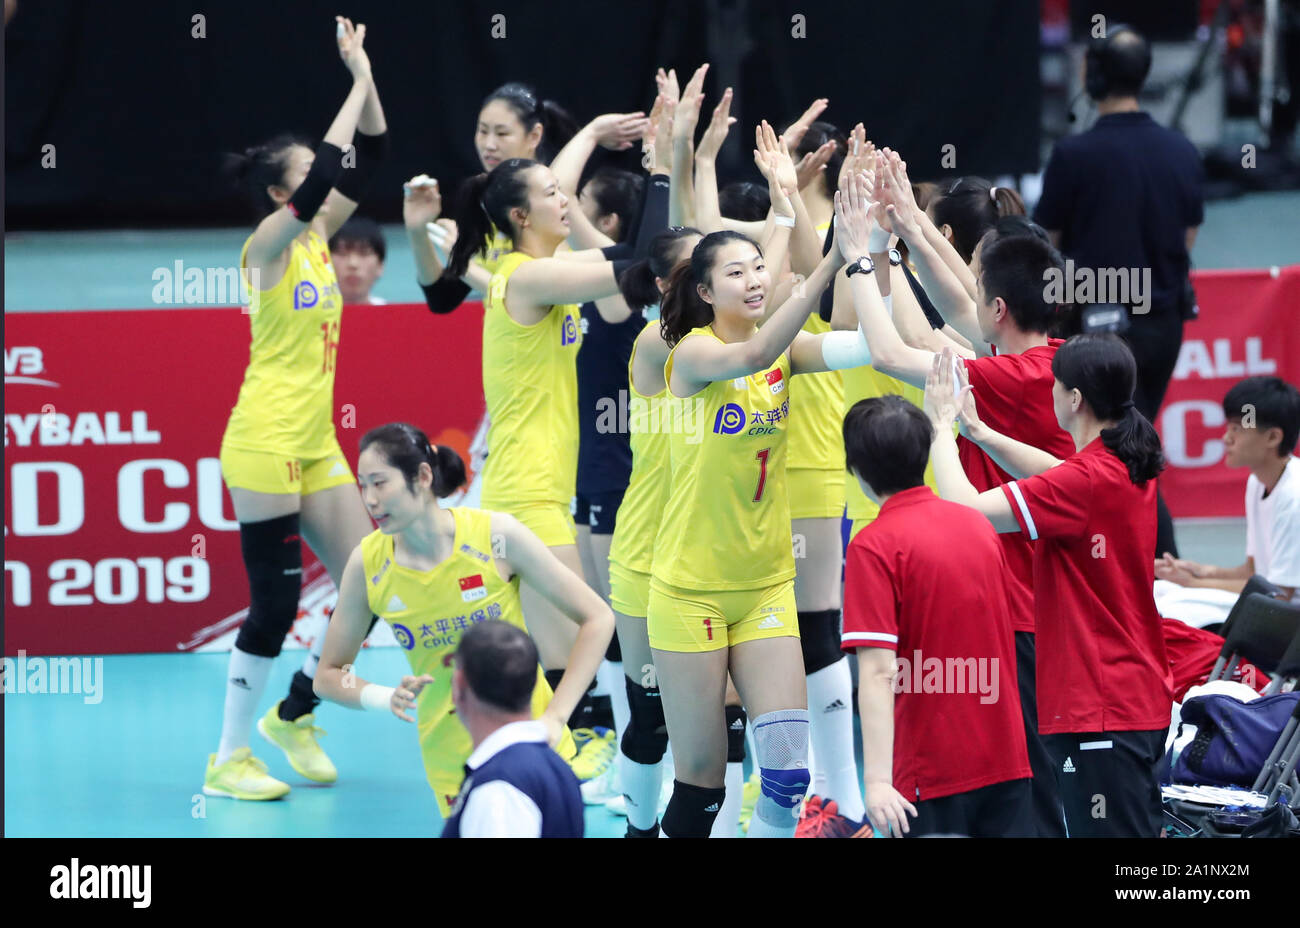 Osaka, Japan. 28th Sep, 2019. Players of China give each other high fives before the Round Robin match between China and Serbia at the 2019 FIVB Women's World Cup in Osaka, Japan, Sept. 28, 2019. Credit: Du Xiaoyi/Xinhua/Alamy Live News Stock Photo